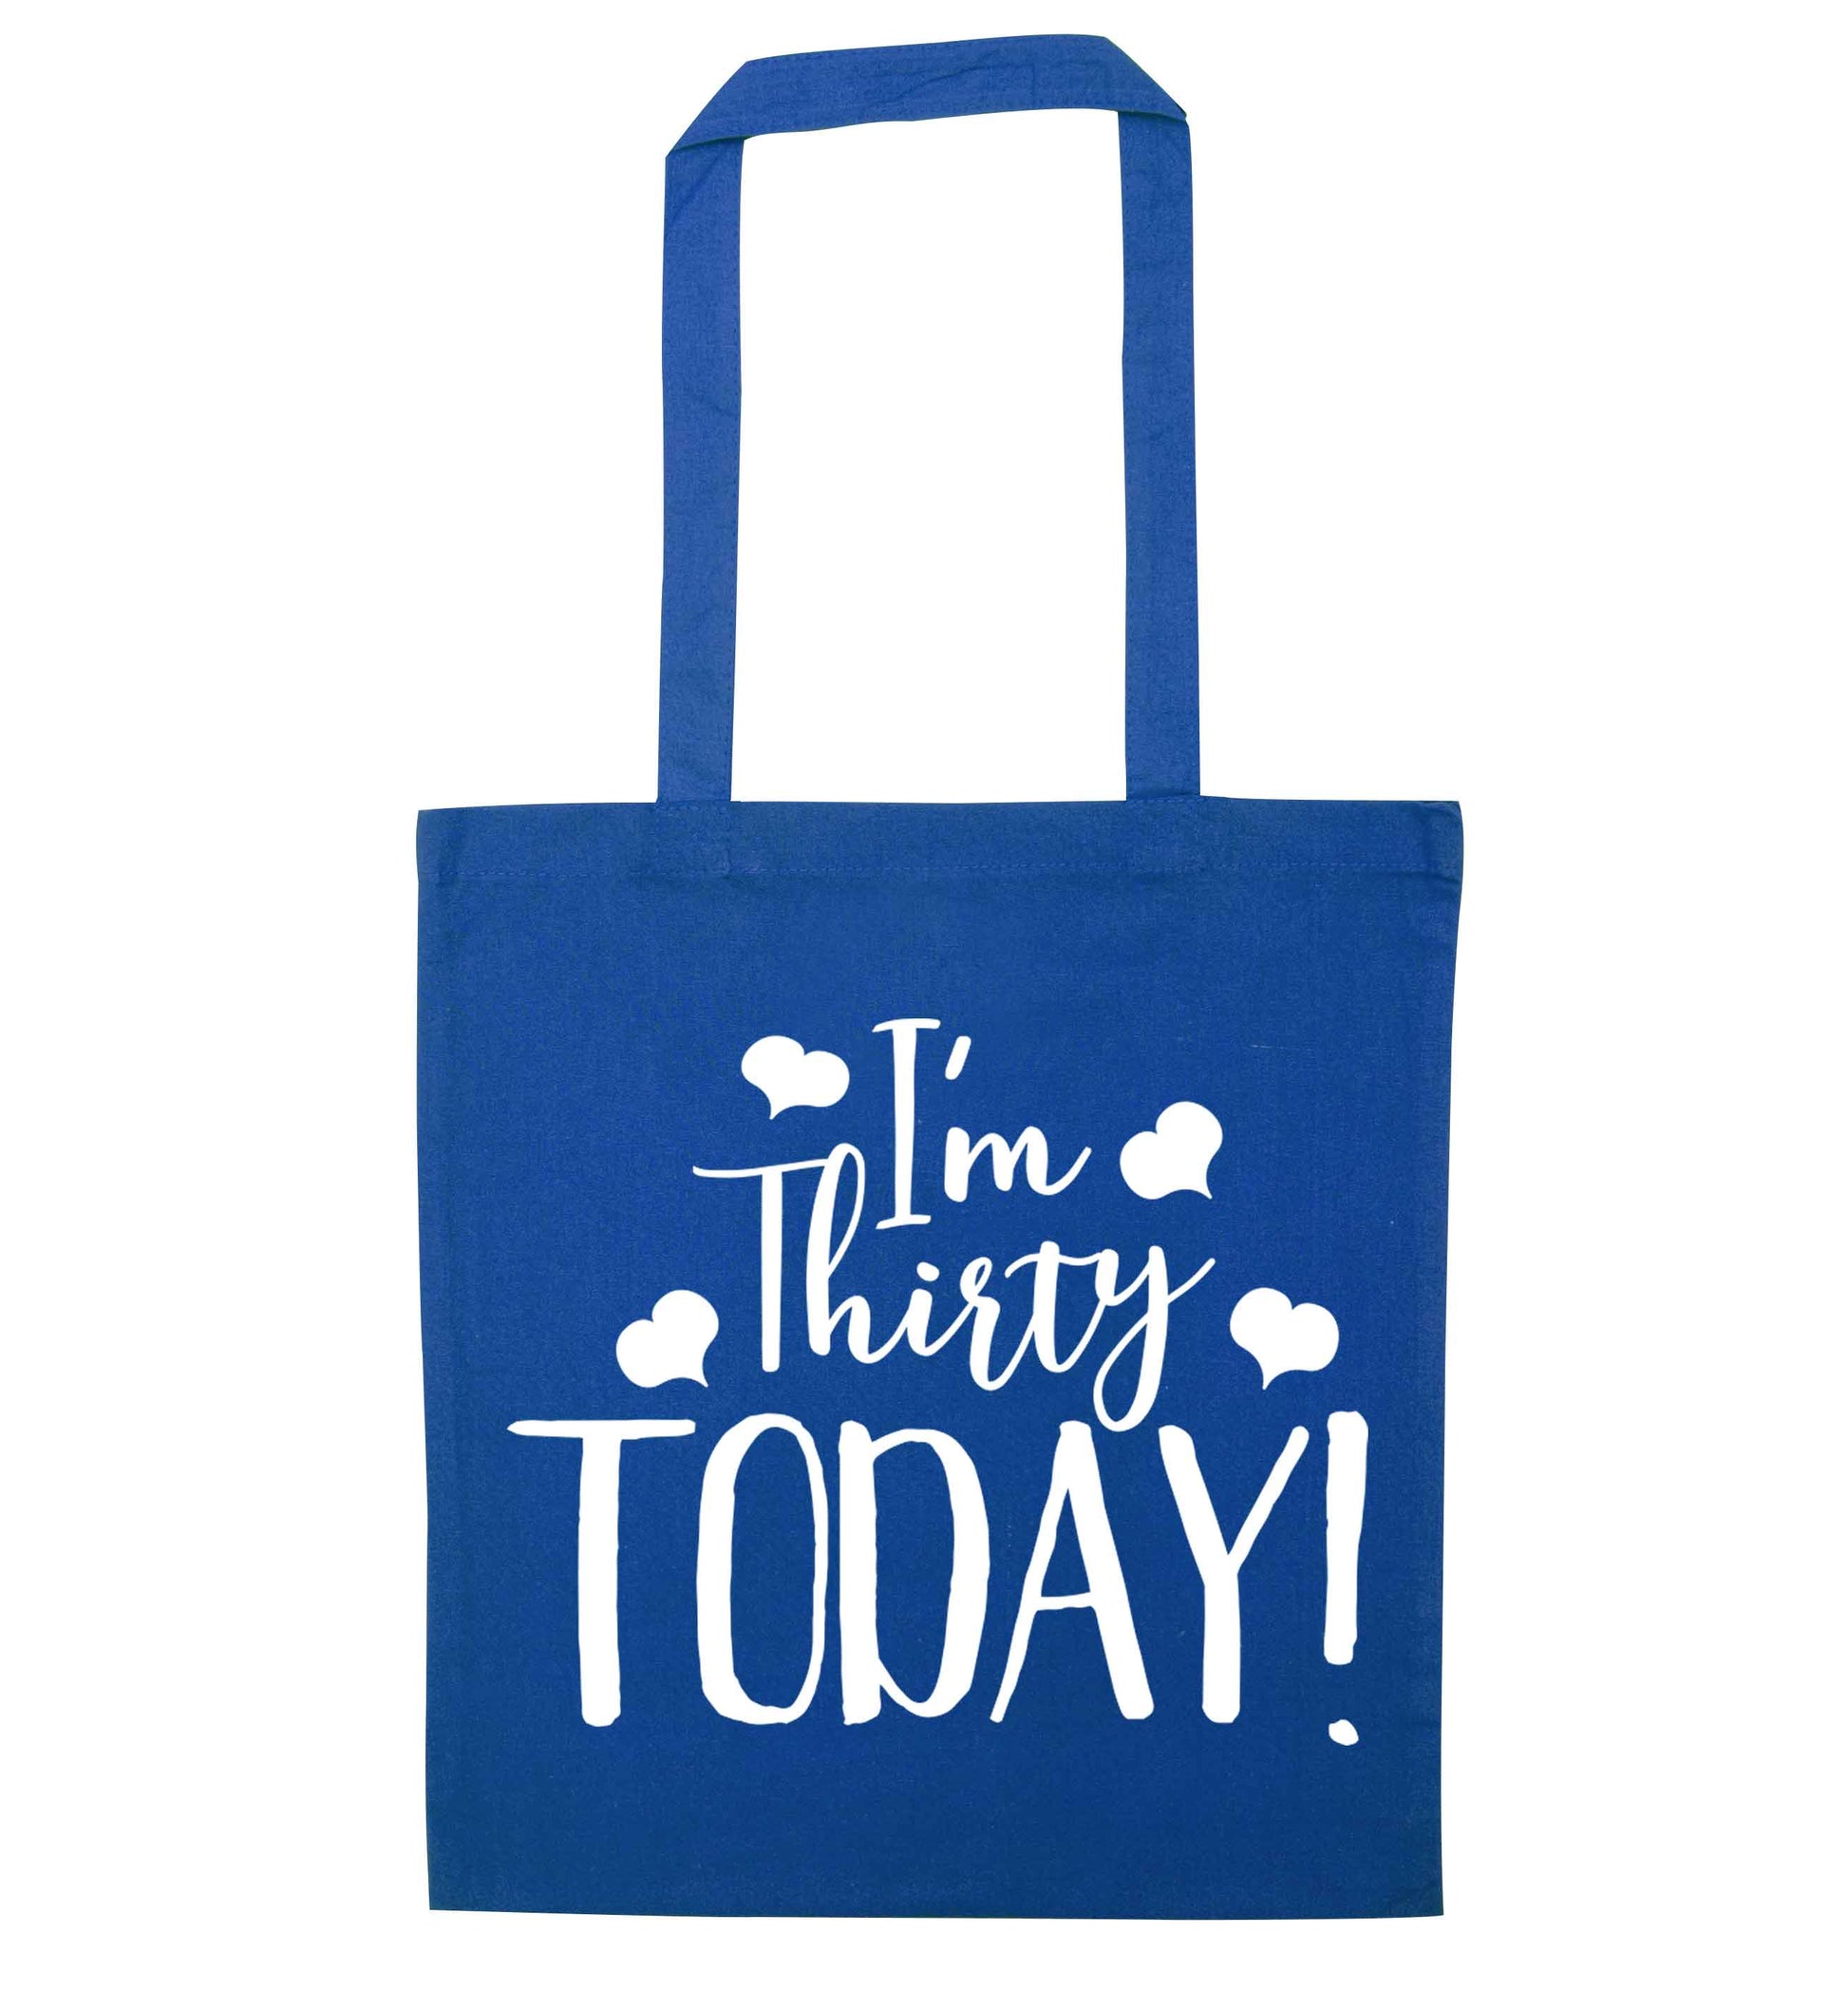 I'm thirty today! blue tote bag